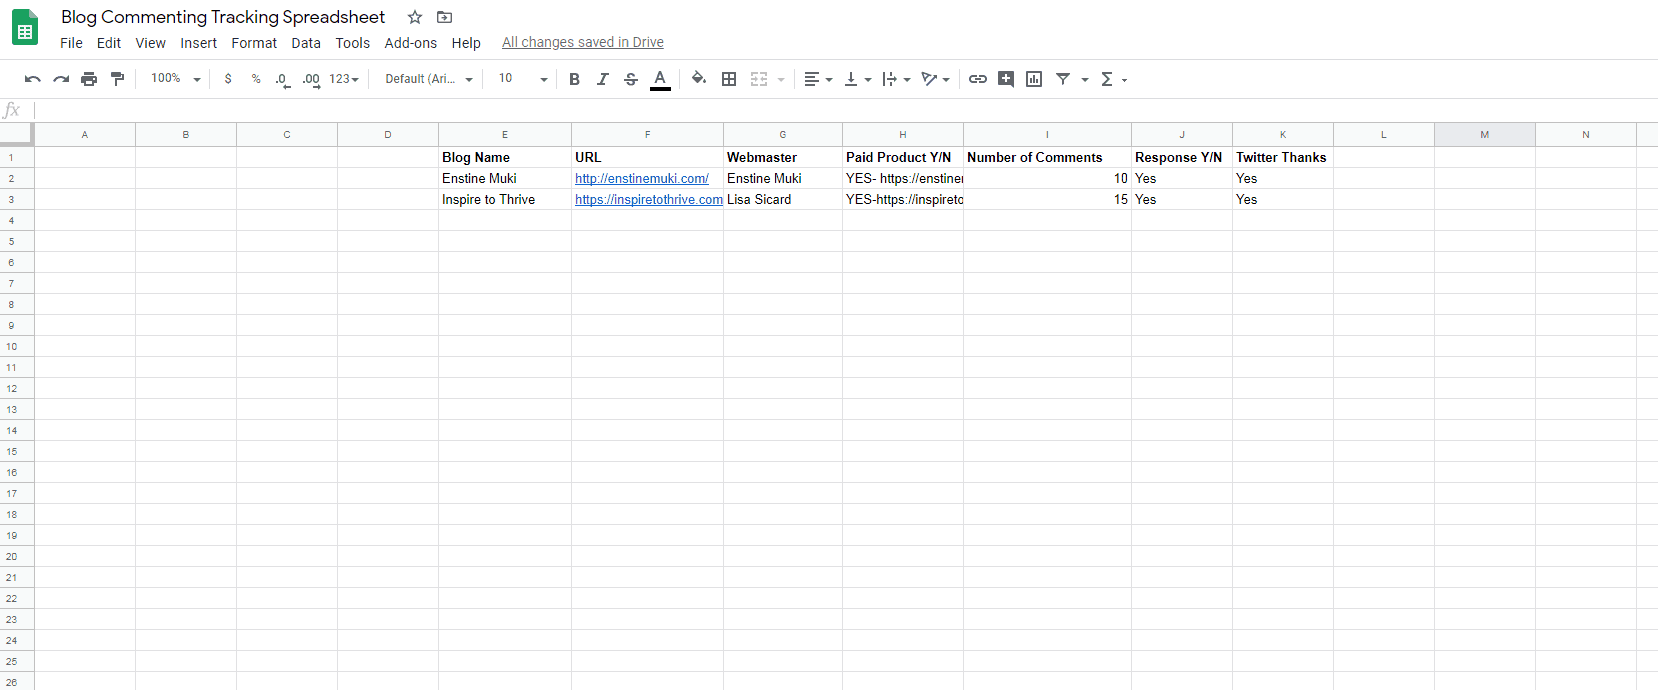 Tracking comments in a spreadsheet